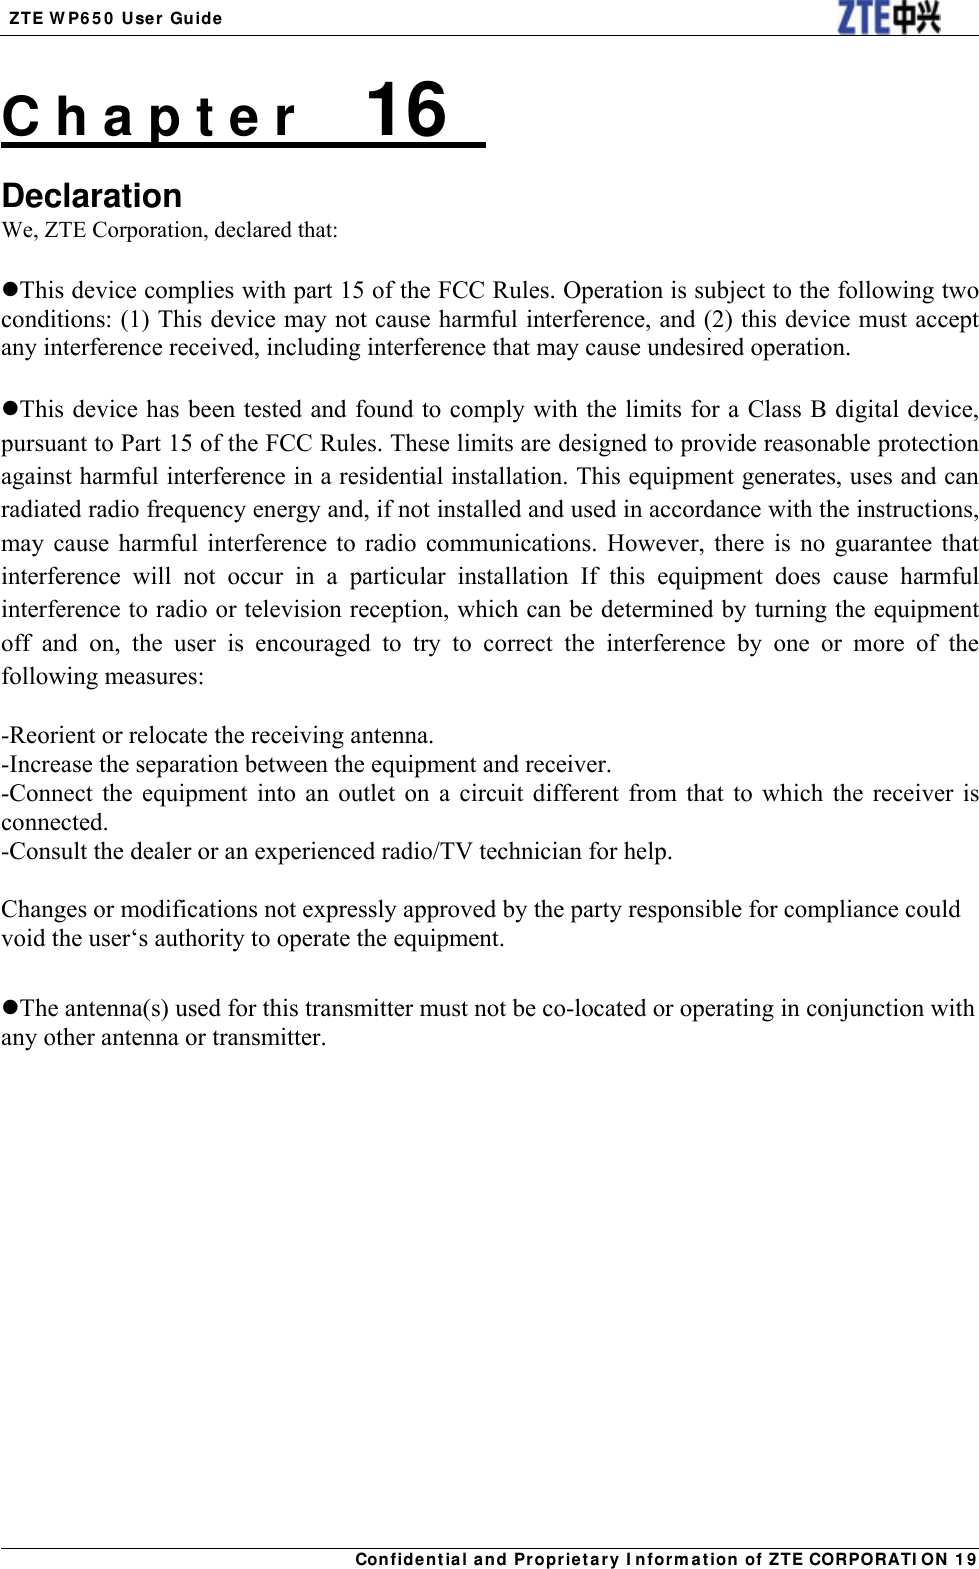  ZTE WP650 User Guide  Confidential and Proprietary Information of ZTE CORPORATION 19C h a p t e r    16   Declaration We, ZTE Corporation, declared that:  This device complies with part 15 of the FCC Rules. Operation is subject to the following two conditions: (1) This device may not cause harmful interference, and (2) this device must accept any interference received, including interference that may cause undesired operation.  This device has been tested and found to comply with the limits for a Class B digital device, pursuant to Part 15 of the FCC Rules. These limits are designed to provide reasonable protection against harmful interference in a residential installation. This equipment generates, uses and can radiated radio frequency energy and, if not installed and used in accordance with the instructions, may cause harmful interference to radio communications. However, there is no guarantee that interference will not occur in a particular installation If this equipment does cause harmful interference to radio or television reception, which can be determined by turning the equipment off and on, the user is encouraged to try to correct the interference by one or more of the following measures:  -Reorient or relocate the receiving antenna. -Increase the separation between the equipment and receiver. -Connect the equipment into an outlet on a circuit different from that to which the receiver is connected. -Consult the dealer or an experienced radio/TV technician for help.  Changes or modifications not expressly approved by the party responsible for compliance could void the user‘s authority to operate the equipment.  The antenna(s) used for this transmitter must not be co-located or operating in conjunction with any other antenna or transmitter.